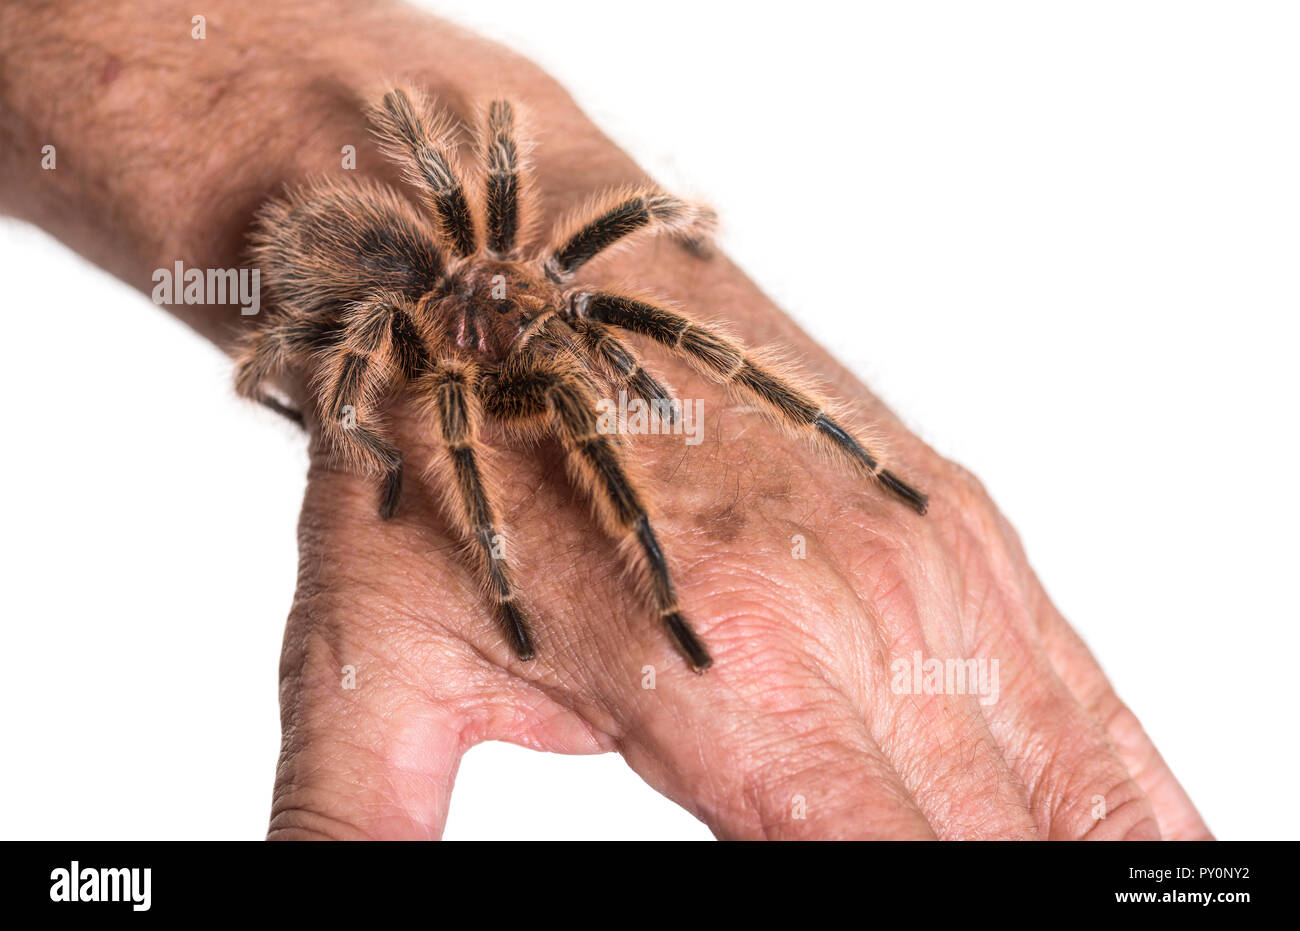 Tarantula on persons hand against white background Stock Photo